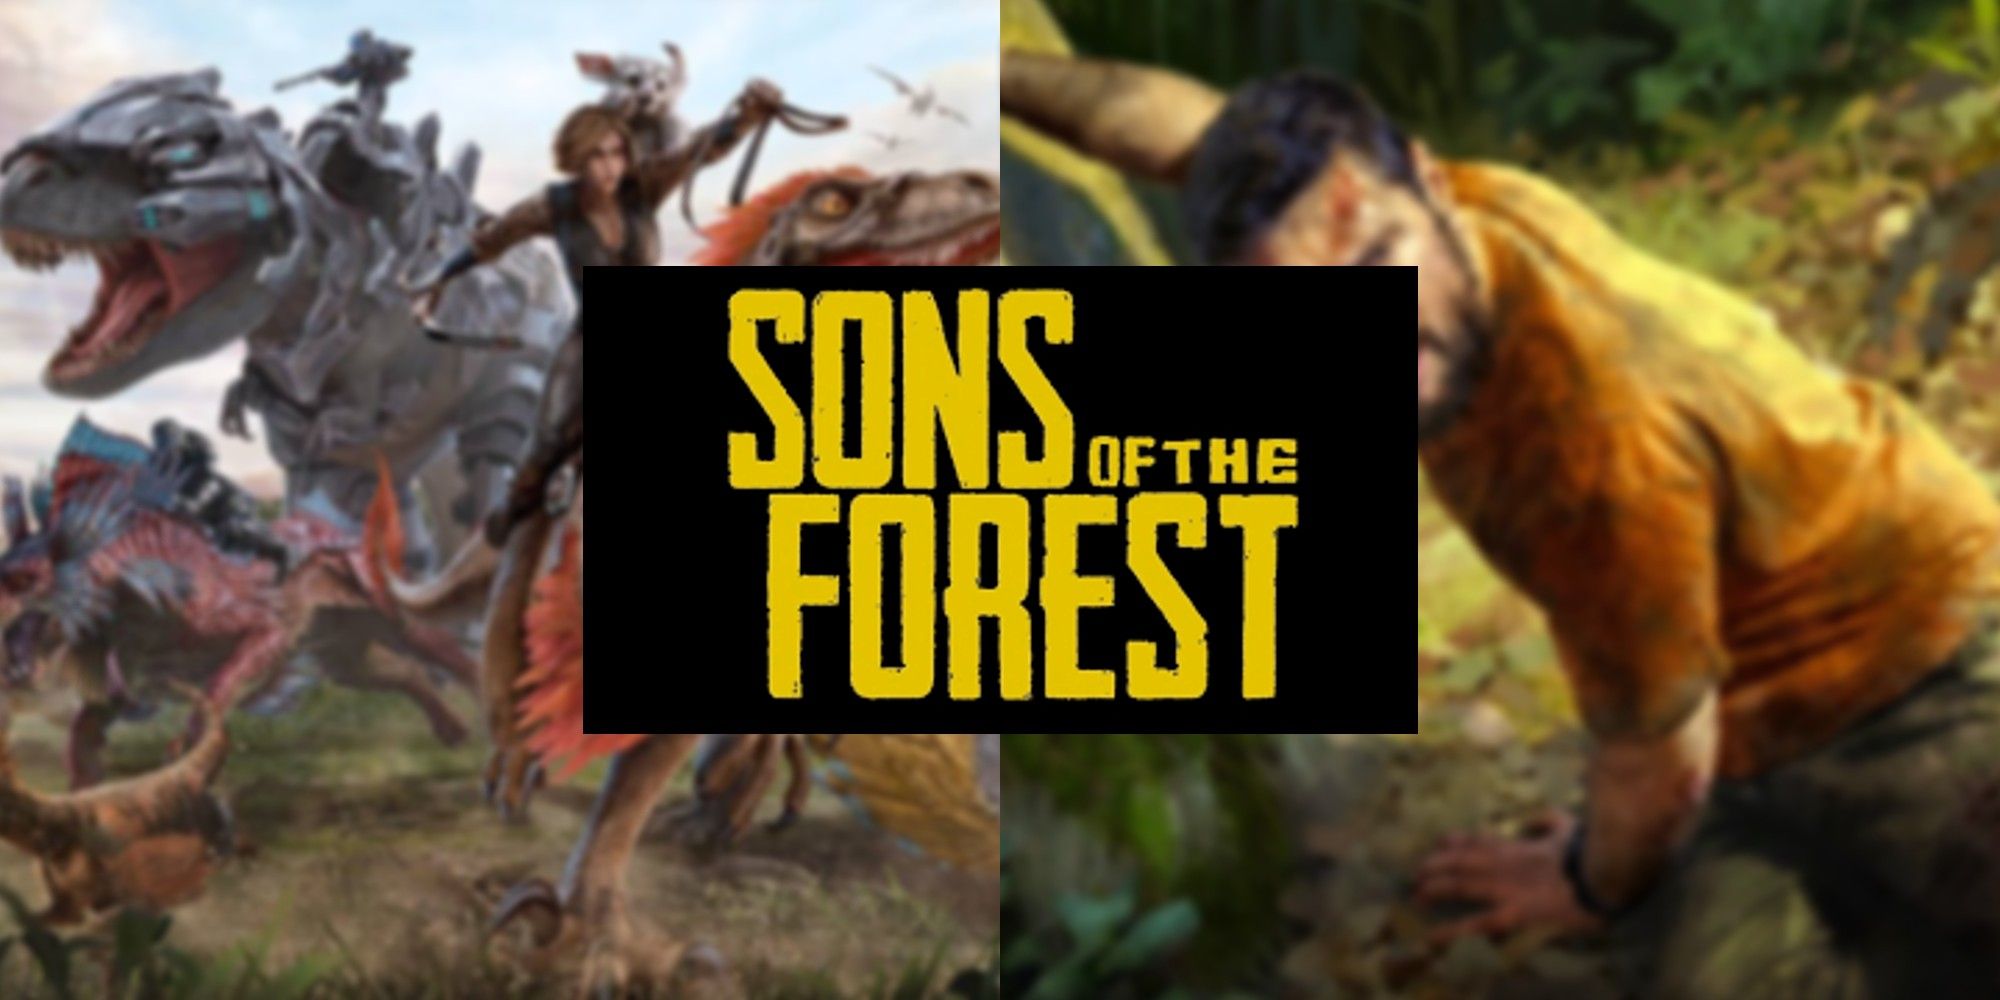 Valheim's Xbox Game Pass Release May Give Sons of the Forest a Run